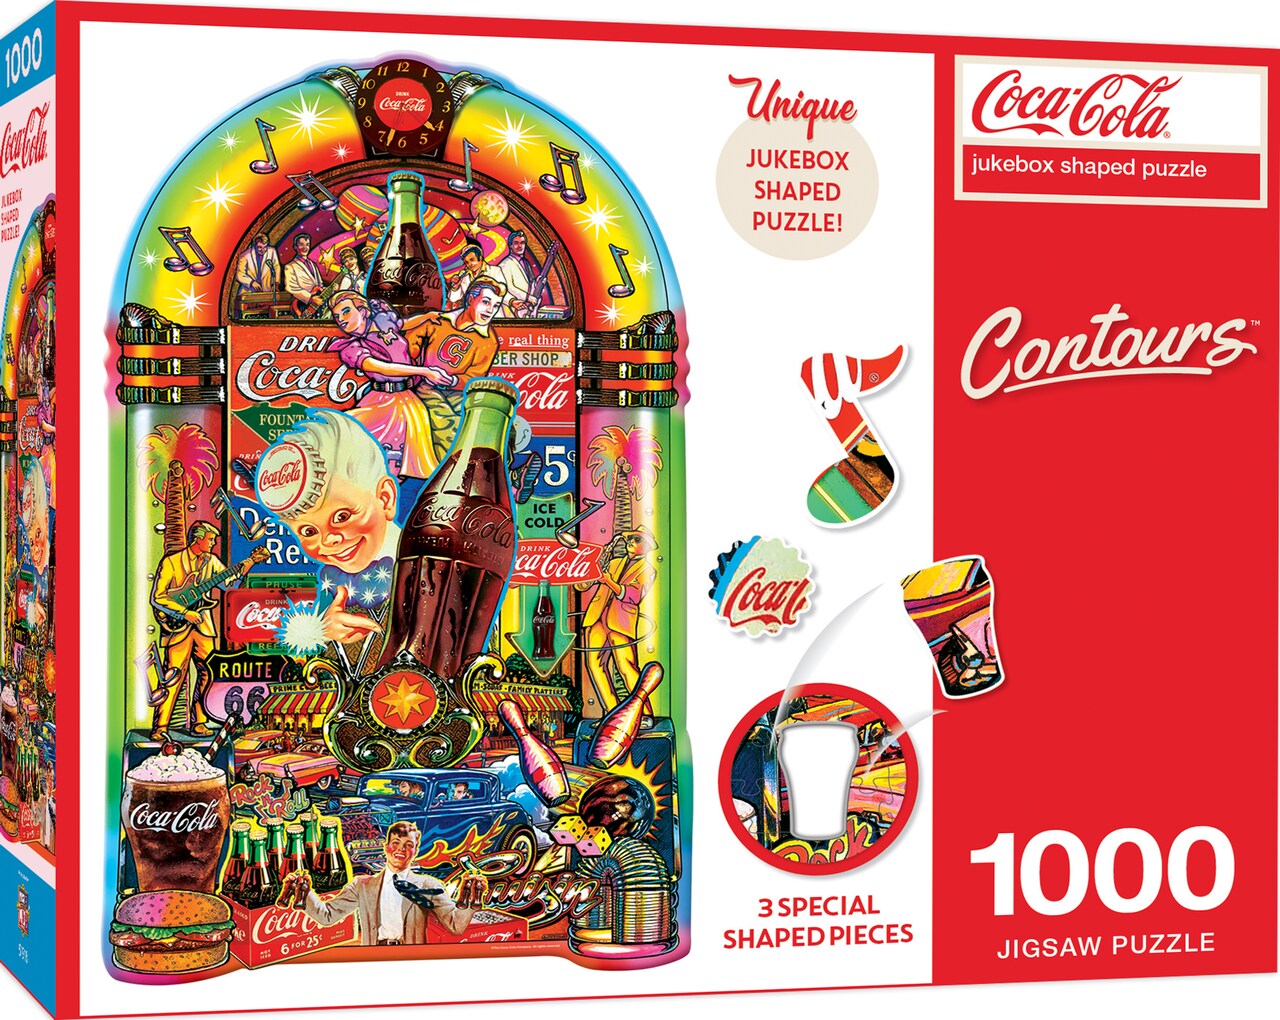 experiencia Silla Organo MasterPieces 1000 Piece Jigsaw Puzzle For Adults and Families - Coca-Cola  Jukebox - 20.72"x 34.6" | Michaels